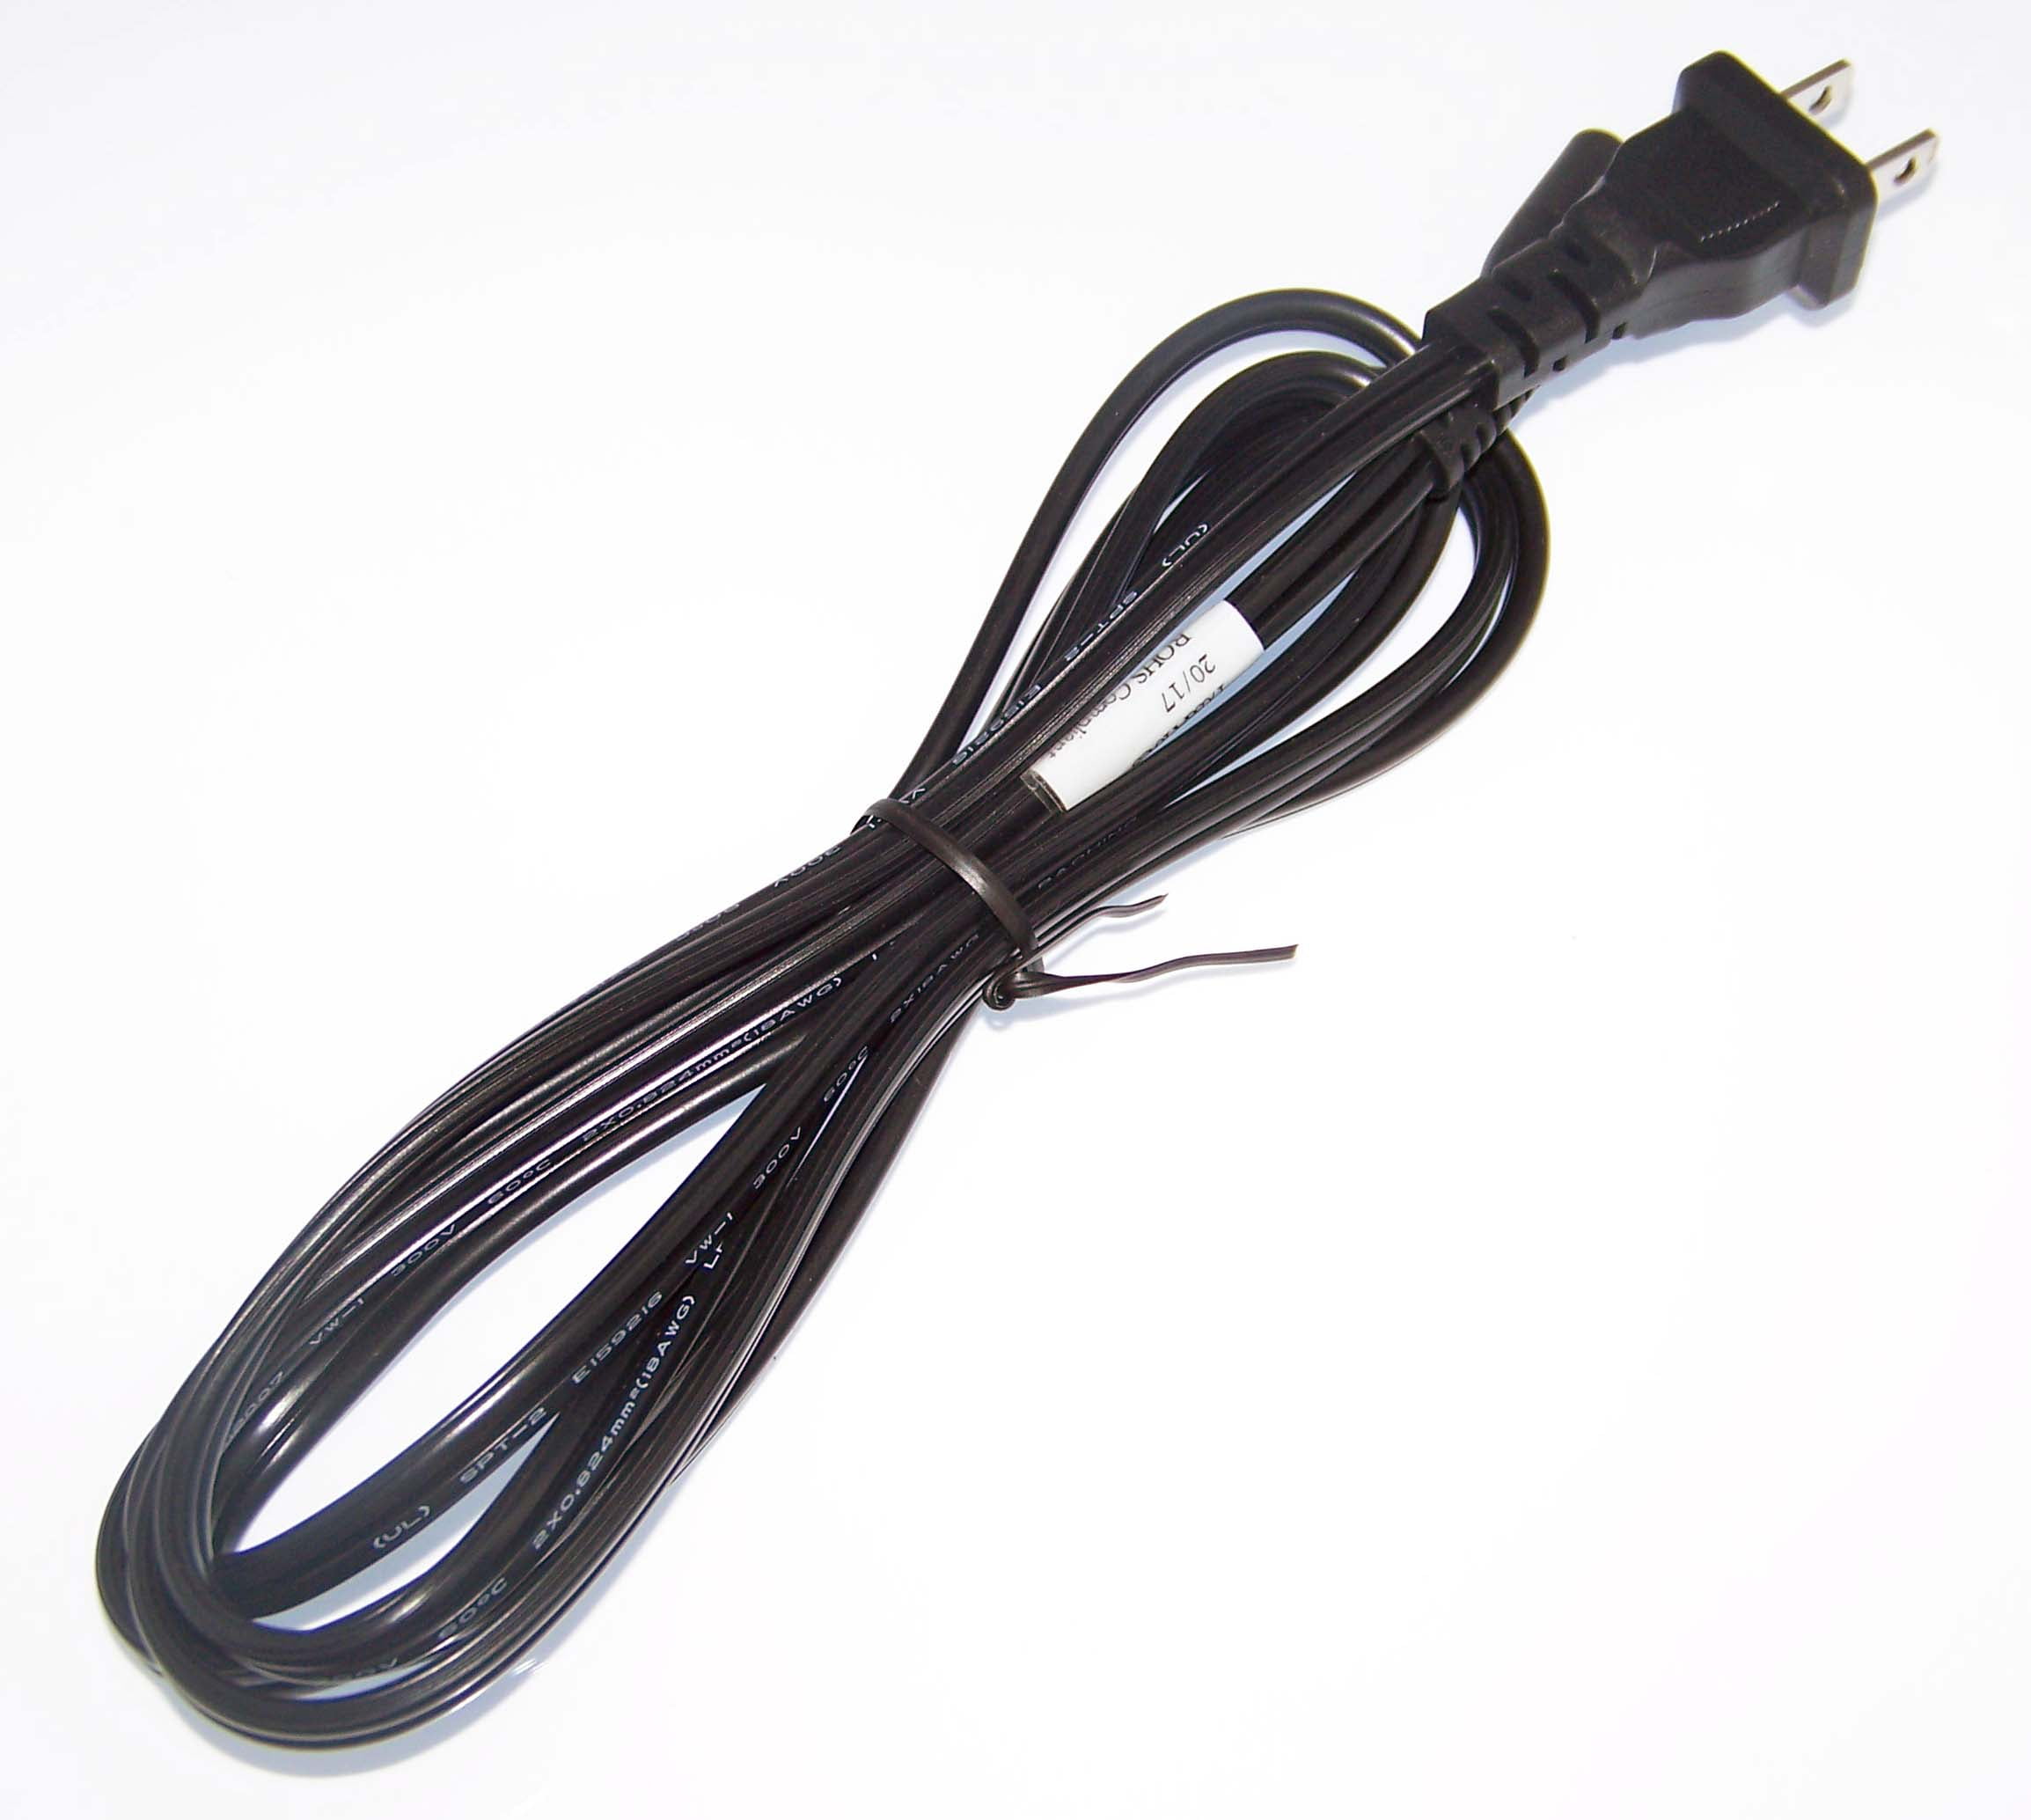 2400 2480, 1670 OEM Epson Scanner Power Cord Cable USA Only Originally Shipped With Perfection 1660 Photo 